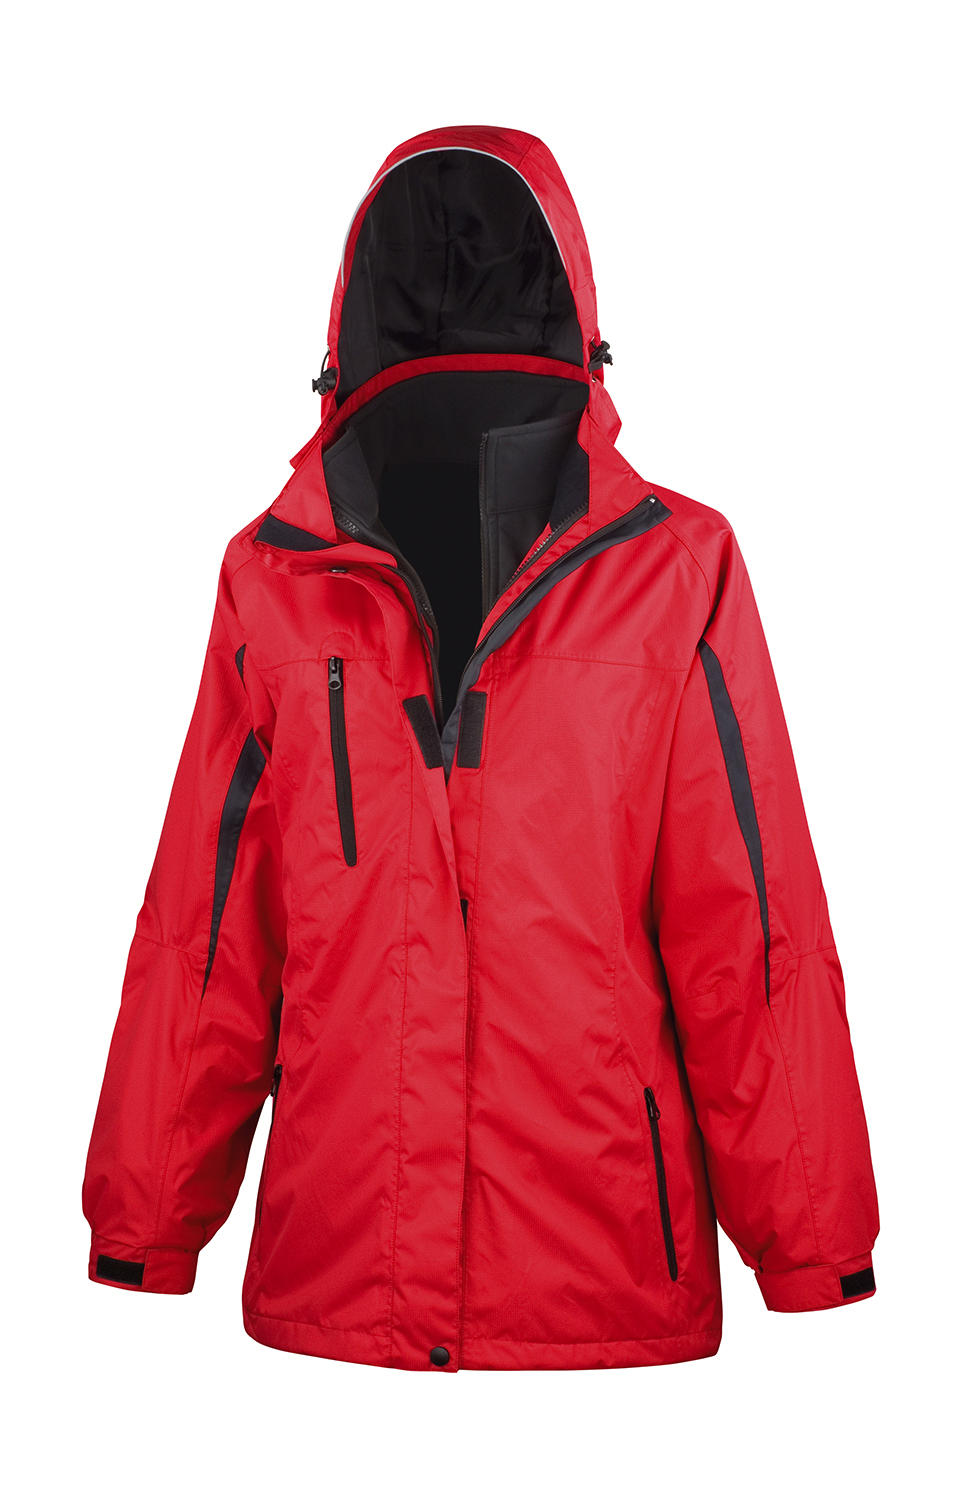  Ladies 3-in-1 Journey Jacket in Farbe Red/Black